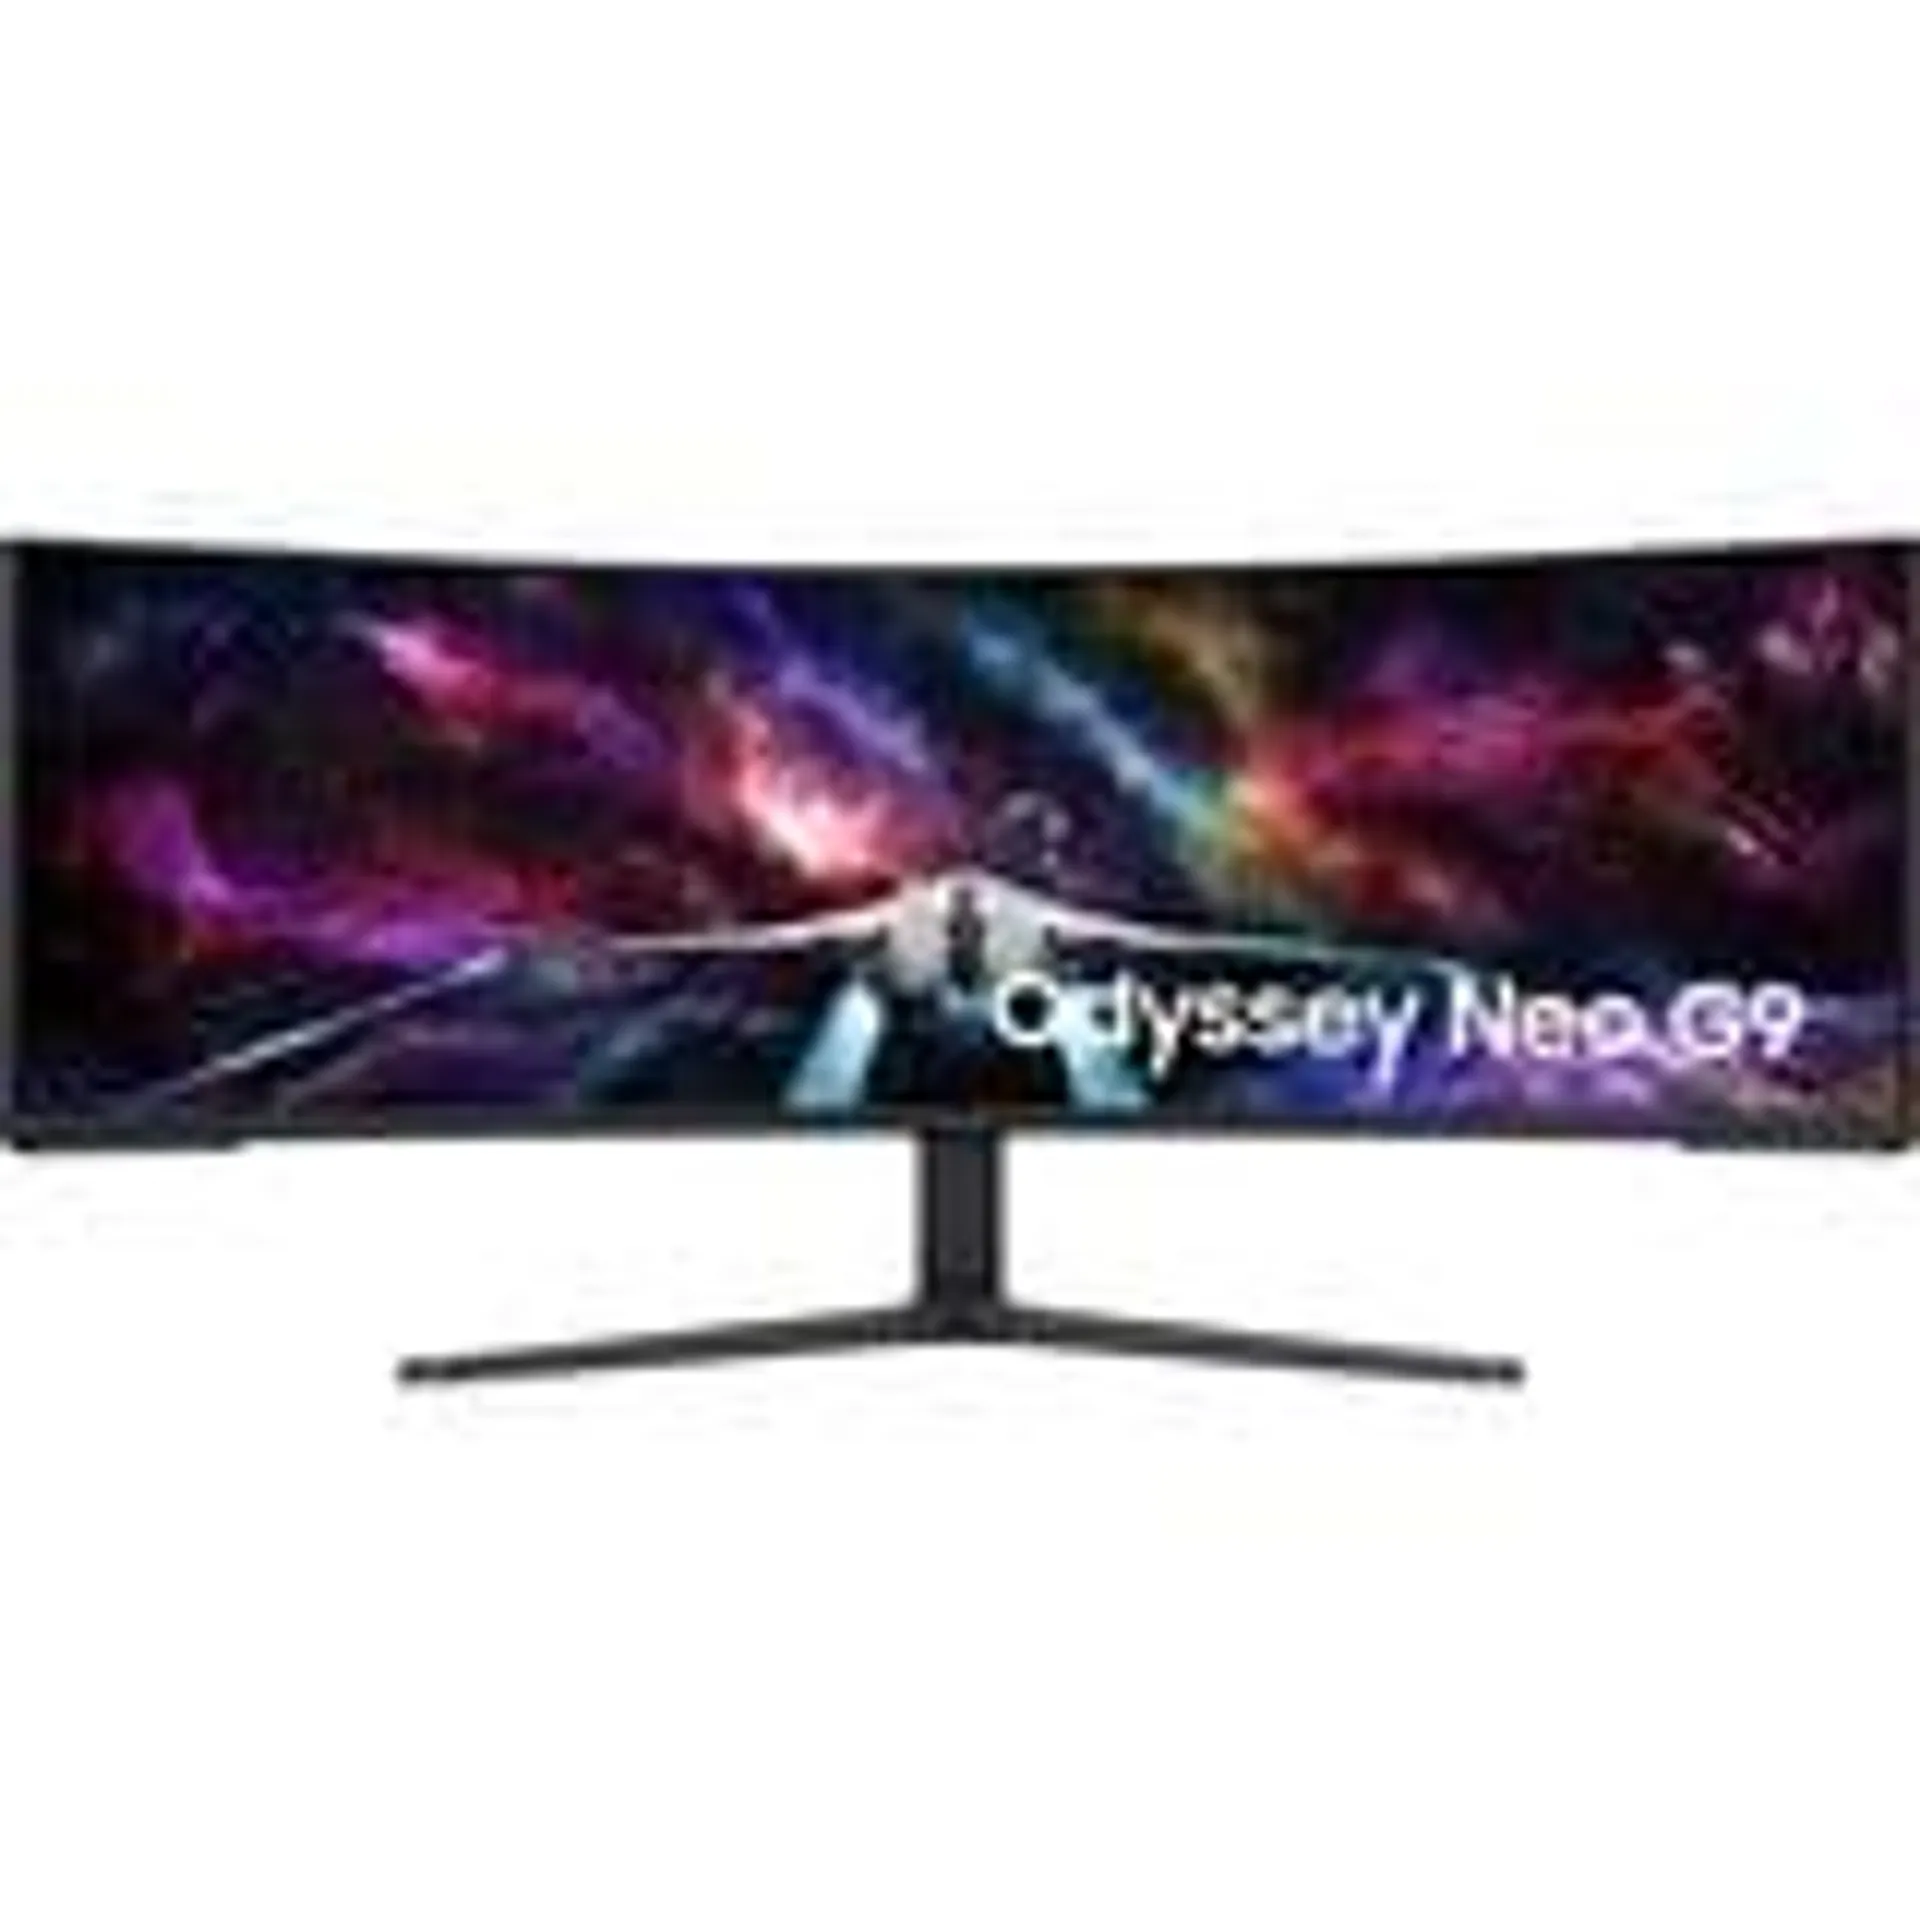 Odyssey Neo G95NC 57" 8K UHD Curved UltraWide gaming monitor